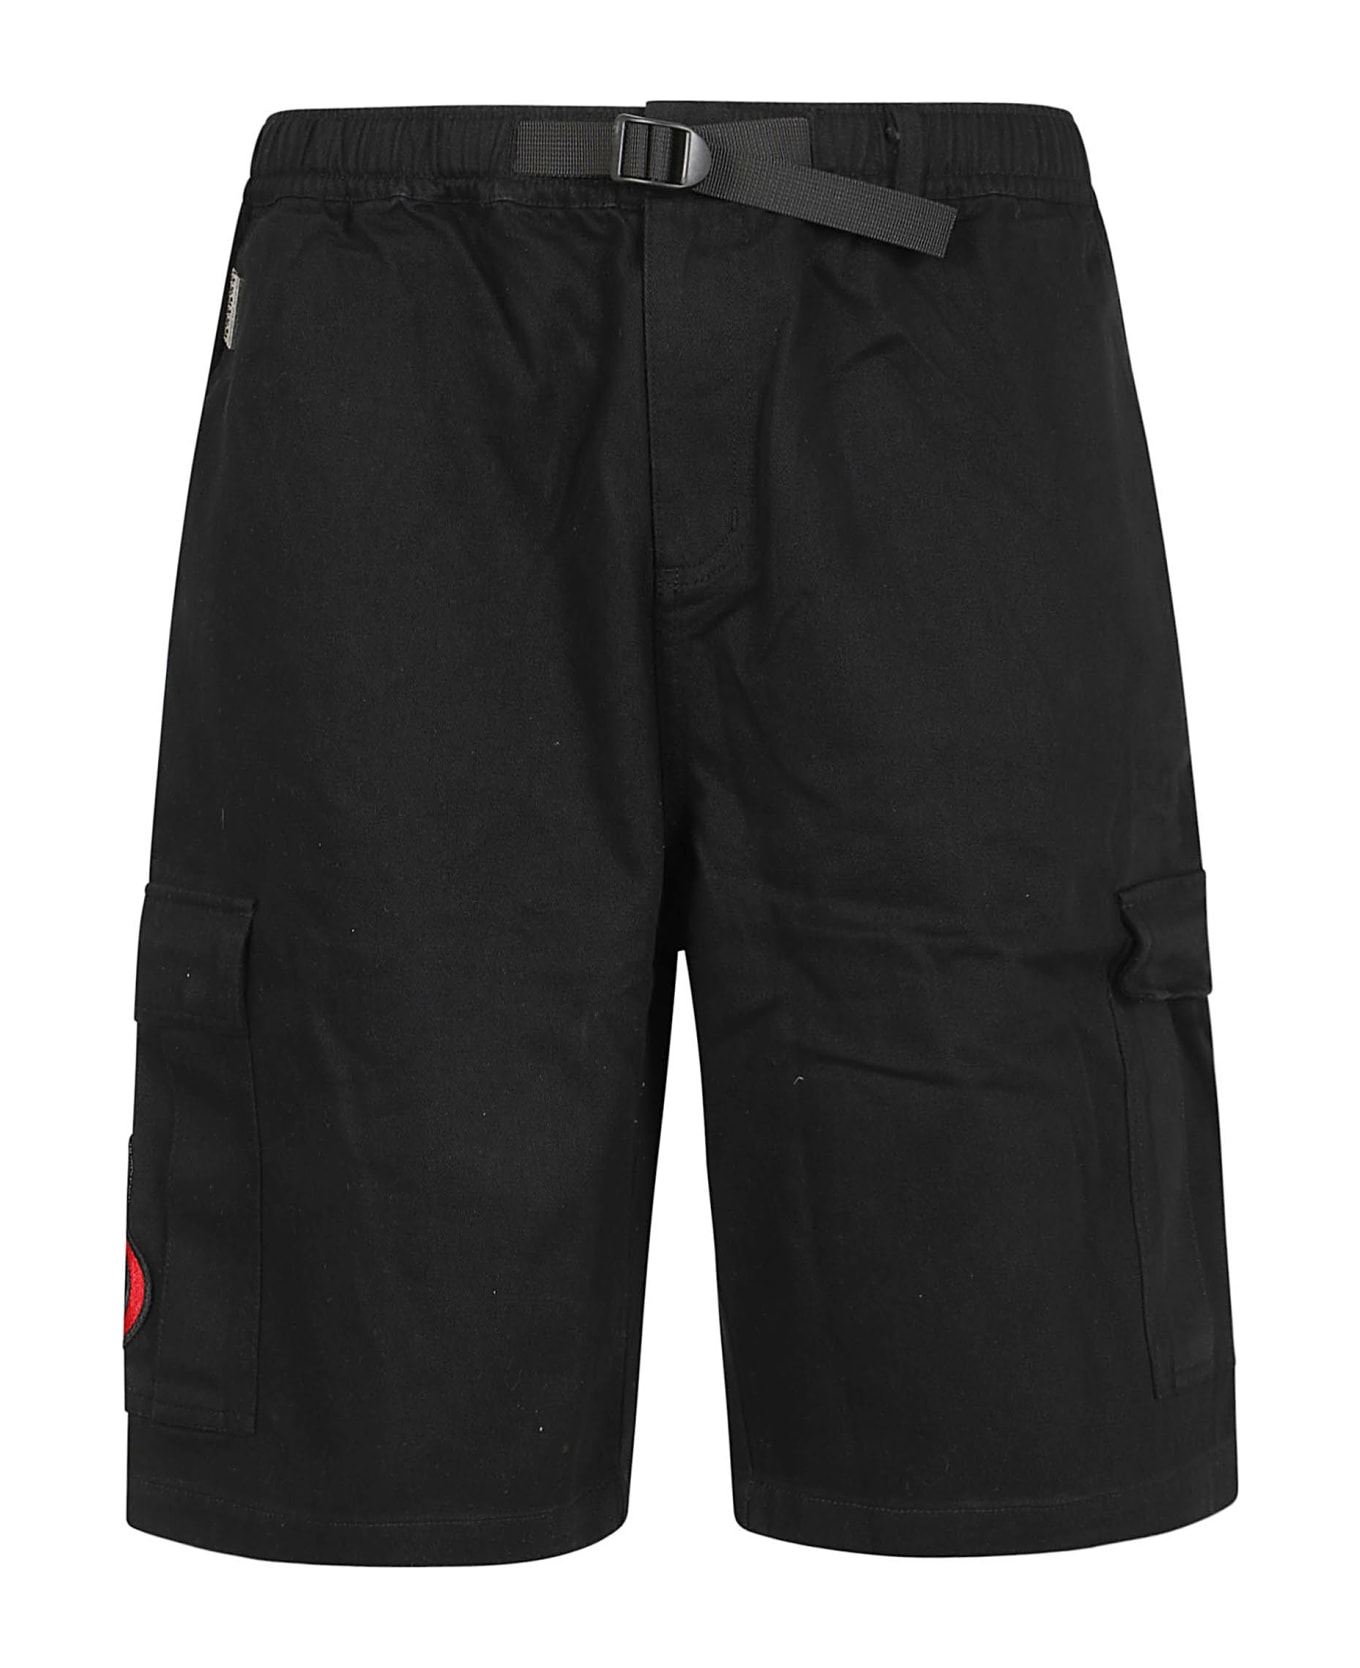 Vision of Super Black Cargo Shorts With Flames Patch And Printed Logo - Black